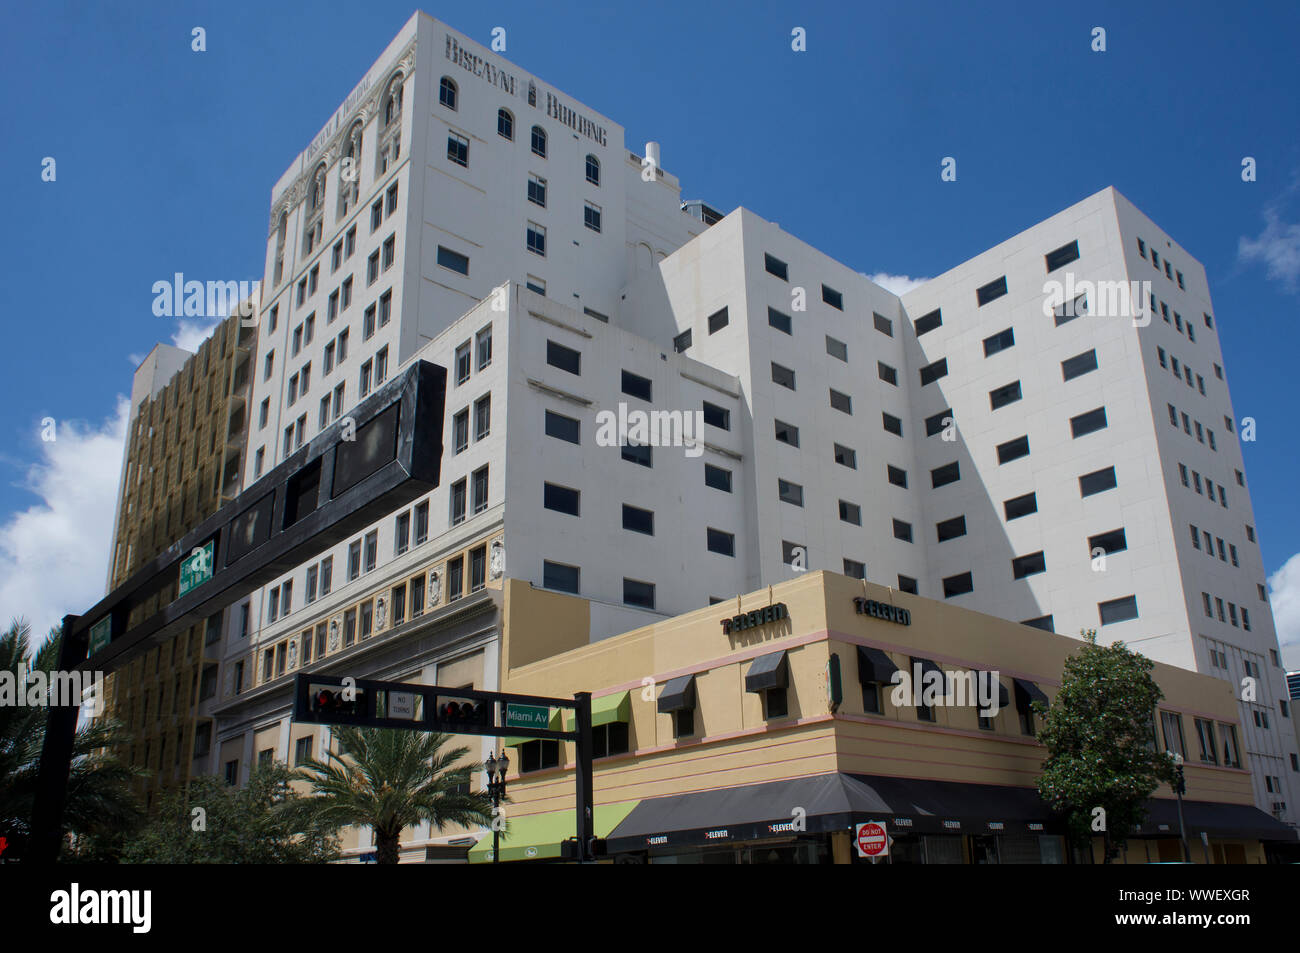 Biscayne building in historic district of Downtown Miami, Florida, USA Stock Photo